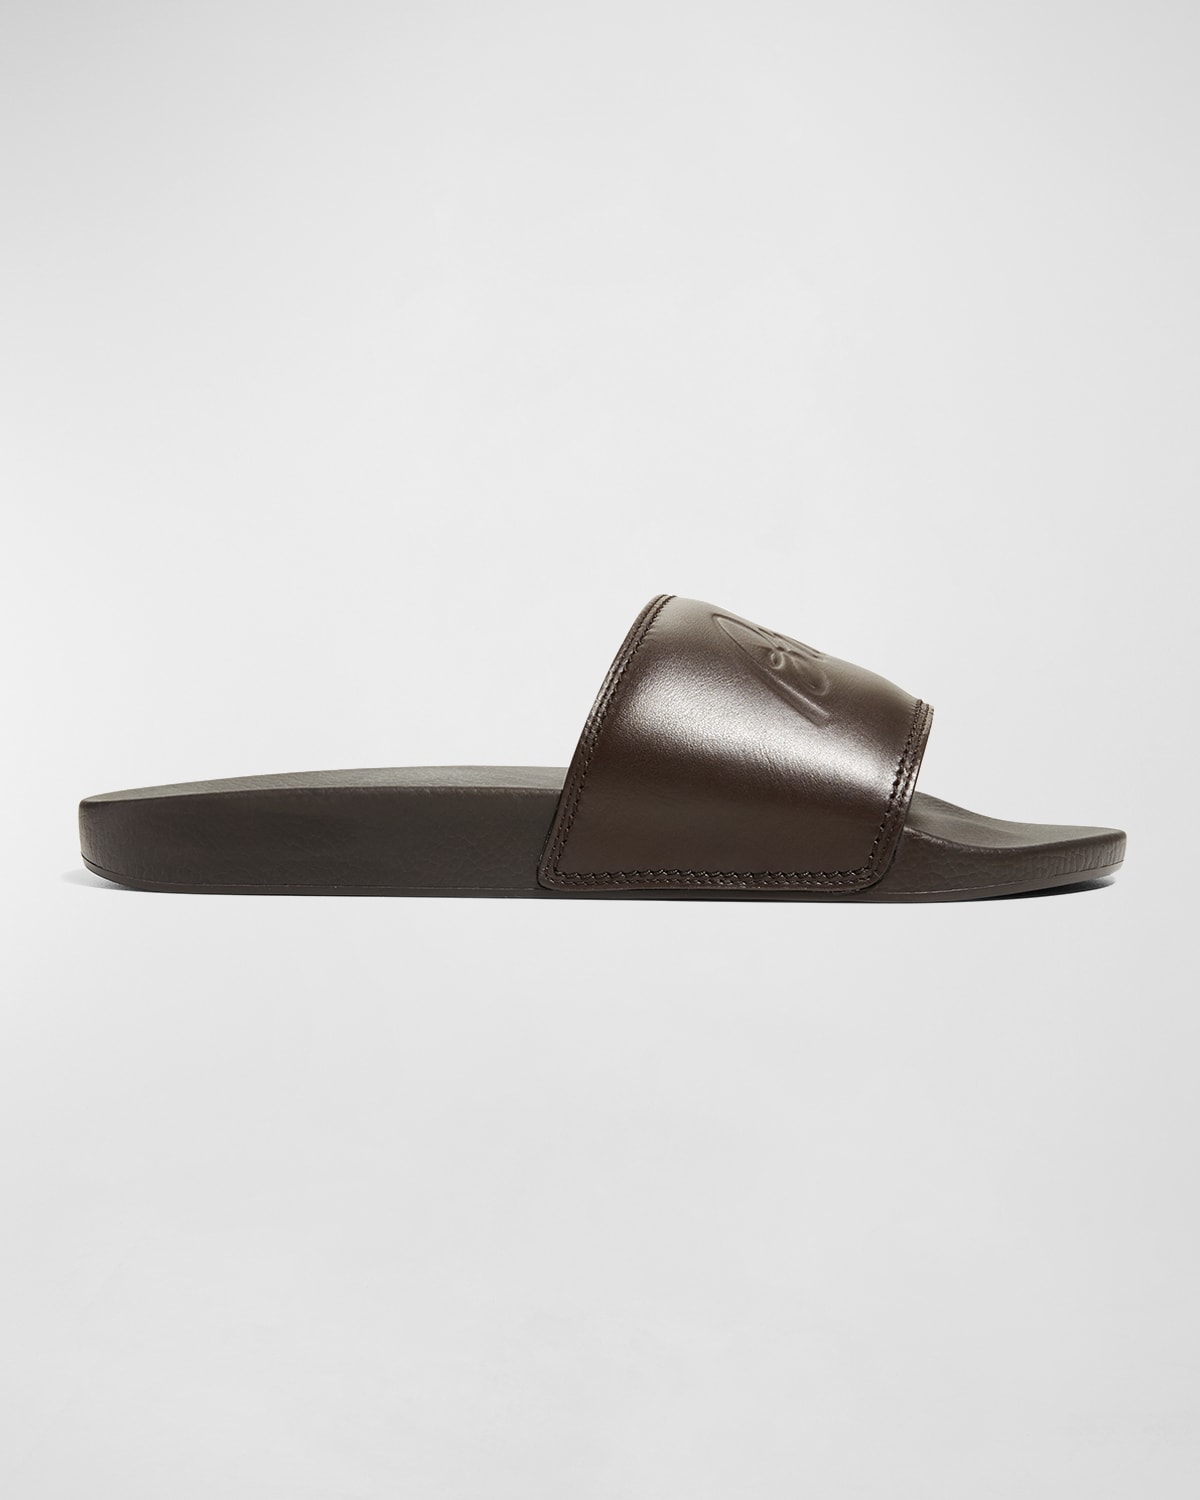 Brioni Men's Leather And Rubber Slide Sandals In Coffee